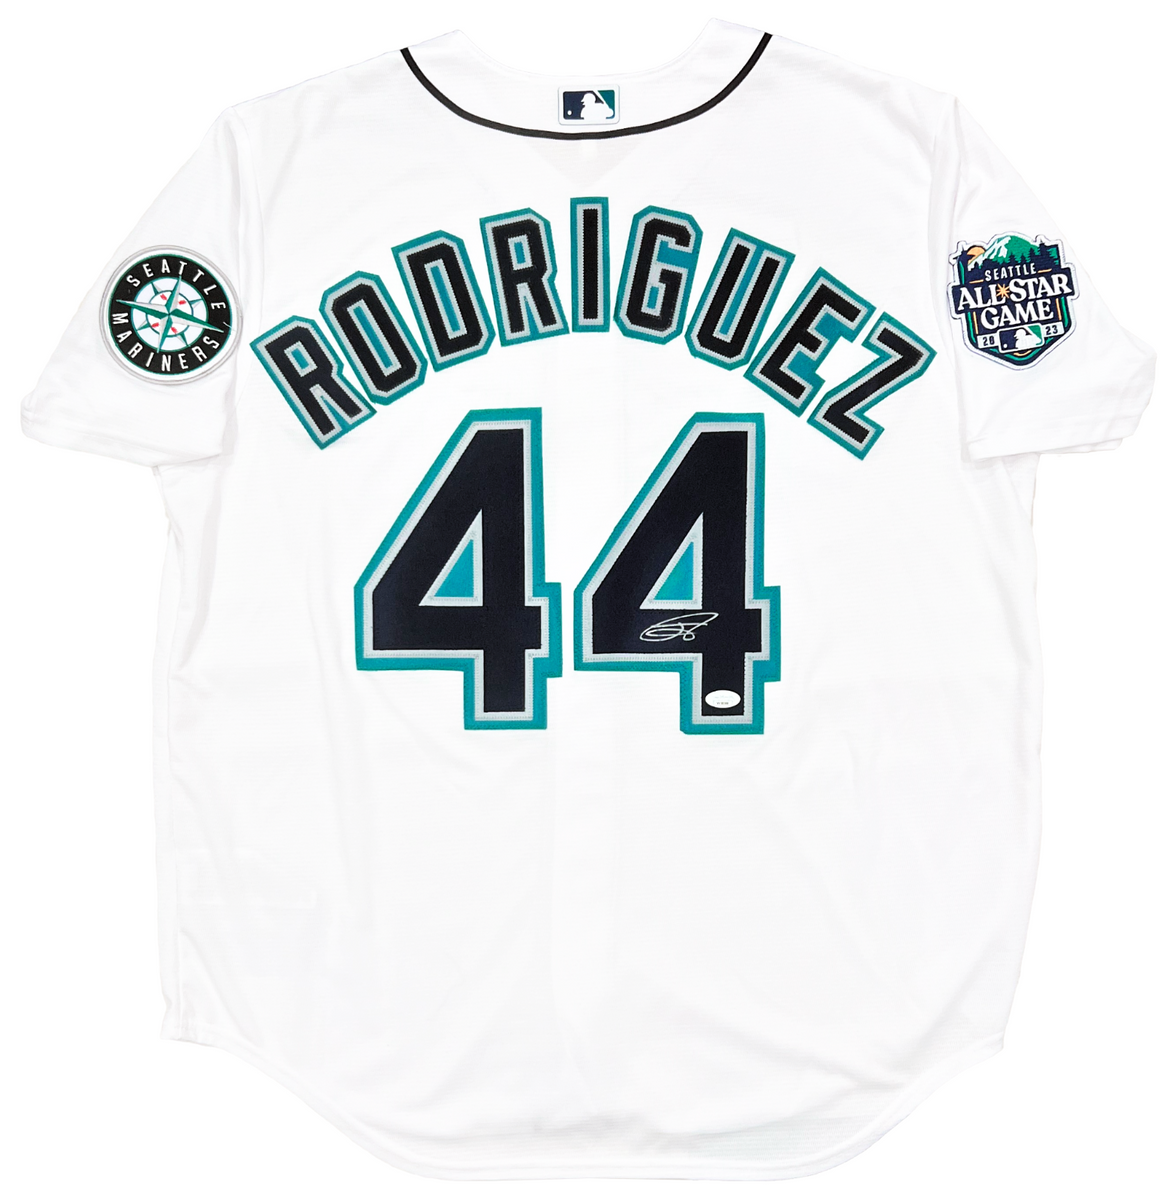 seattle mariners teal jersey